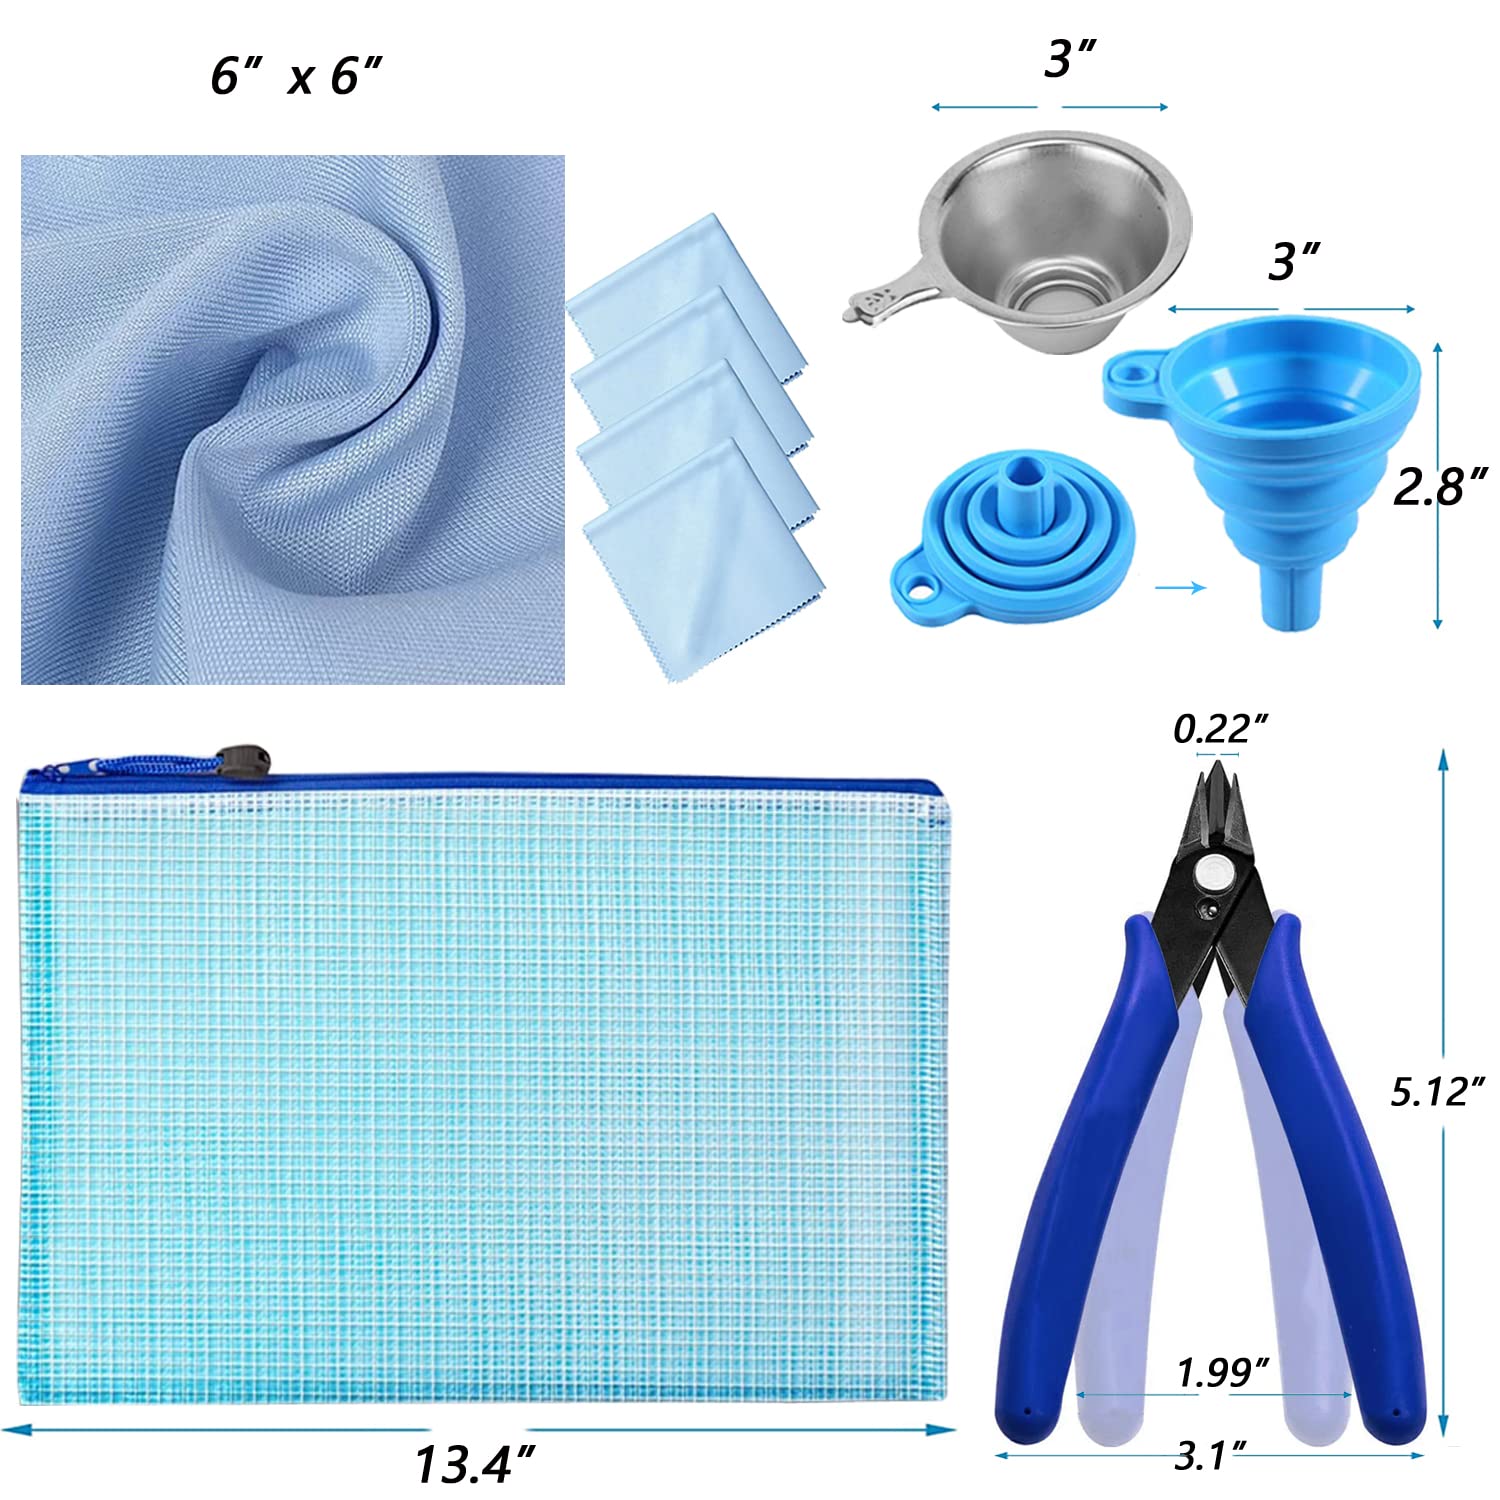 lcd-3d-printer-accessories-resin-tool-kit-includes-stainless-steel-funnel-resin-filter-silicone-pad-photosensitive-resin-2 LCD 3D Printer Accessories Resin Tool Kit Review